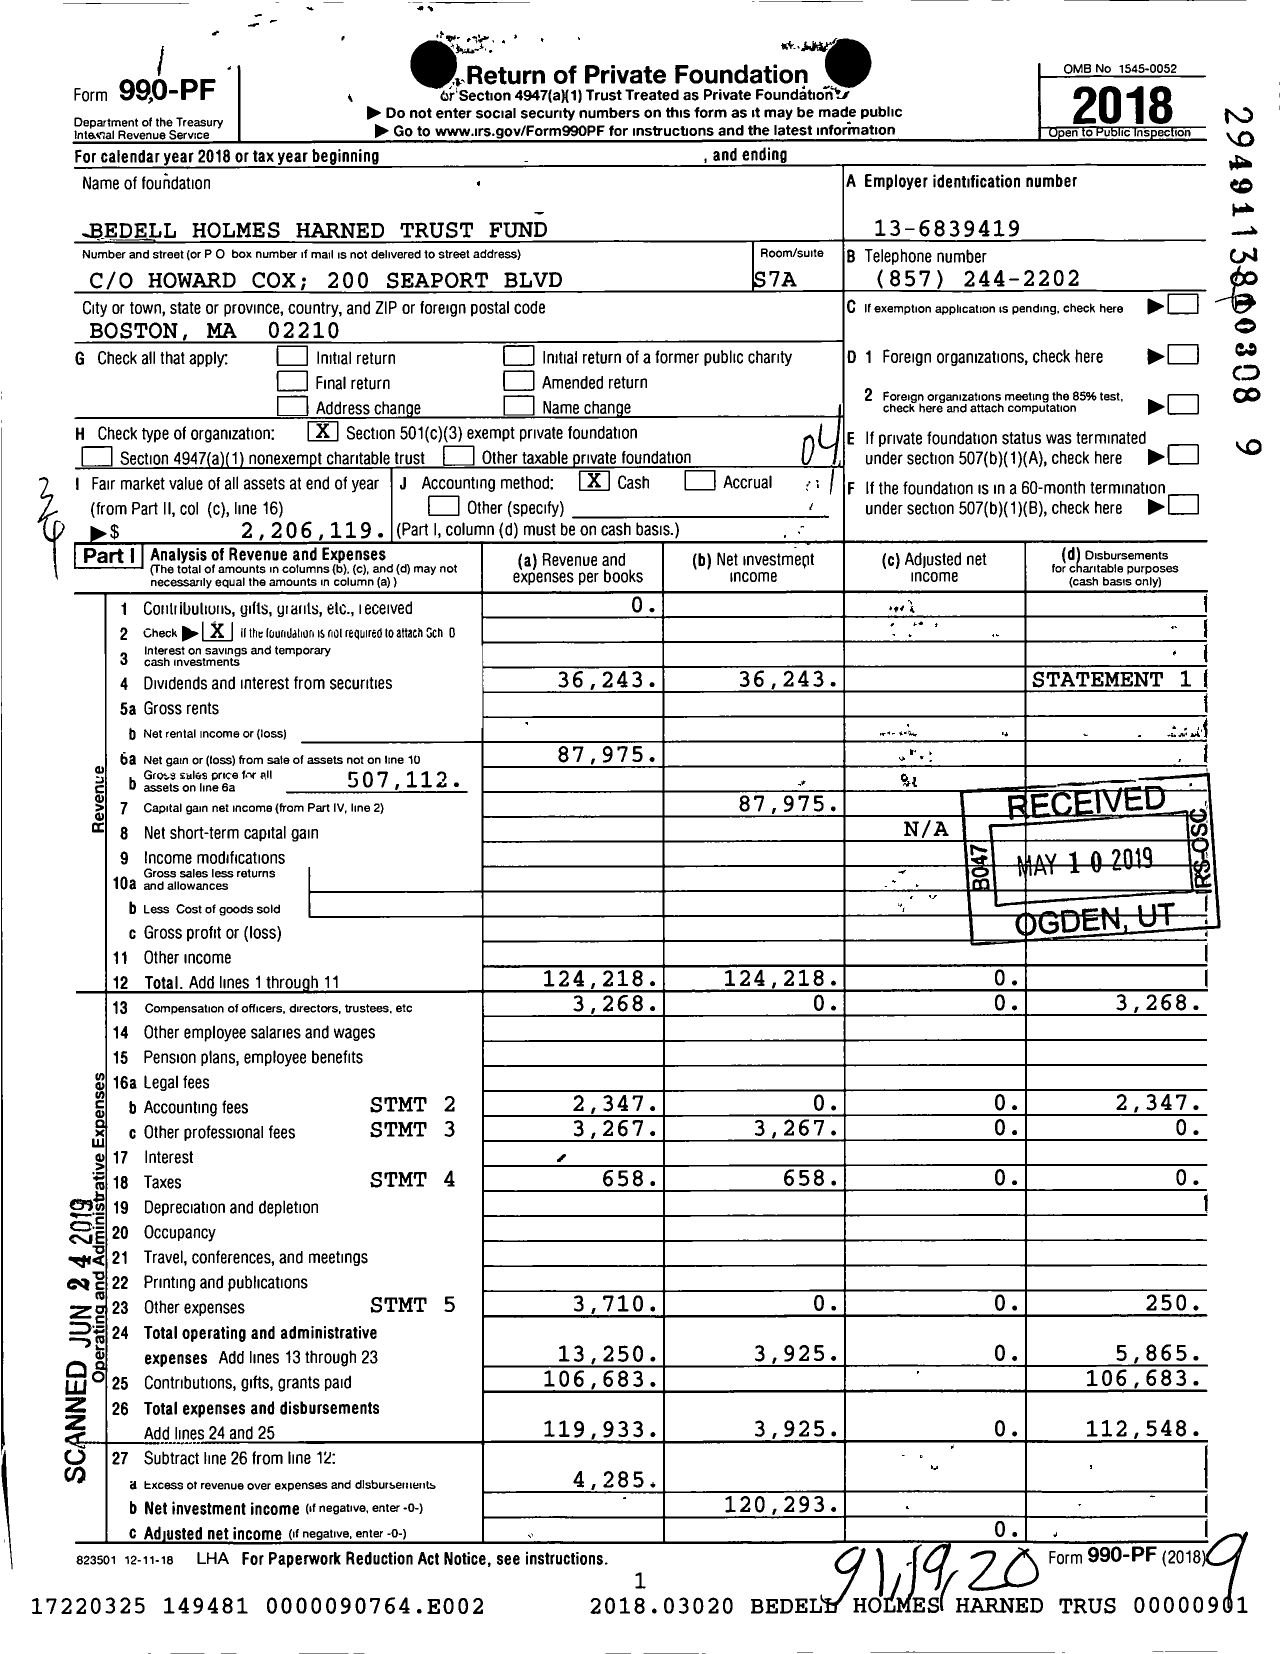 Image of first page of 2018 Form 990PF for Bedell Holmes Harned Trust Fund